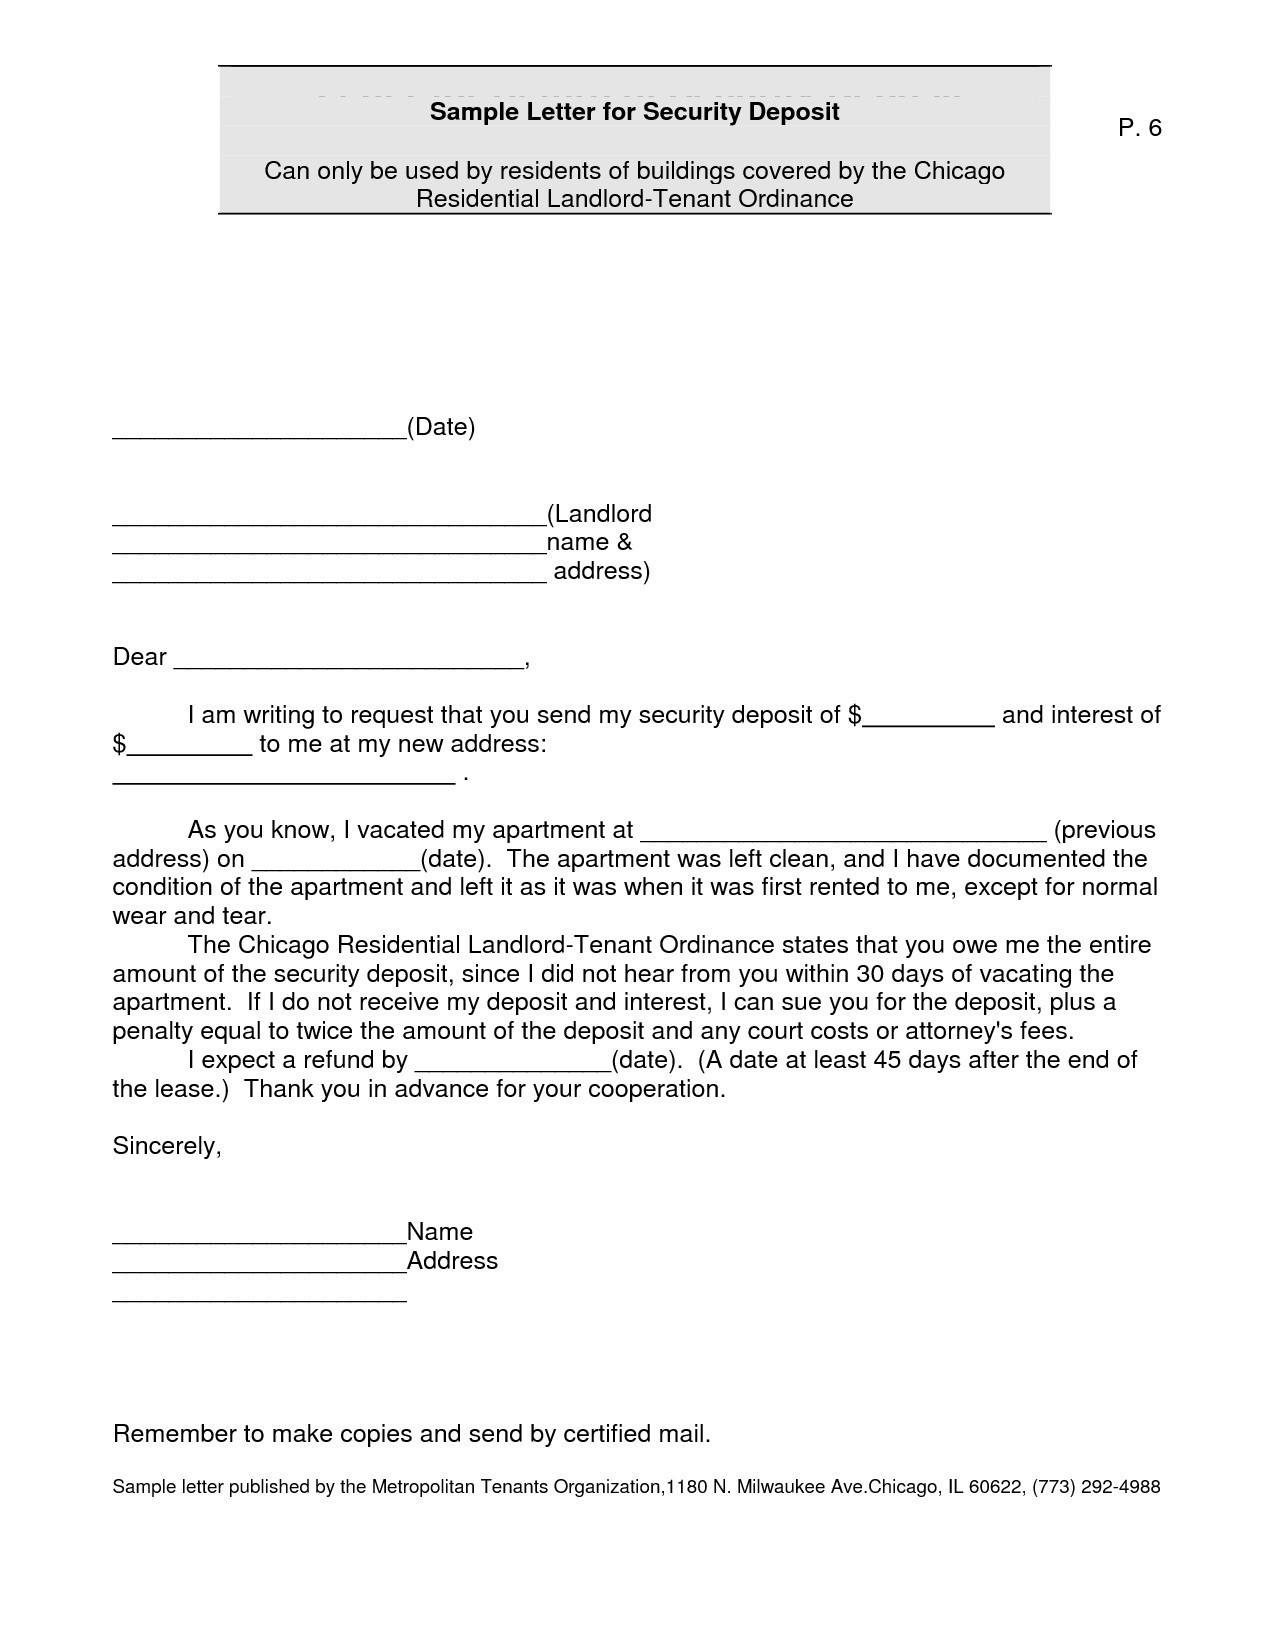 security deposit demand letter template florida example-New Refund Letter Best Letter format for Requesting A Refund Best Best S Demand for 1-s